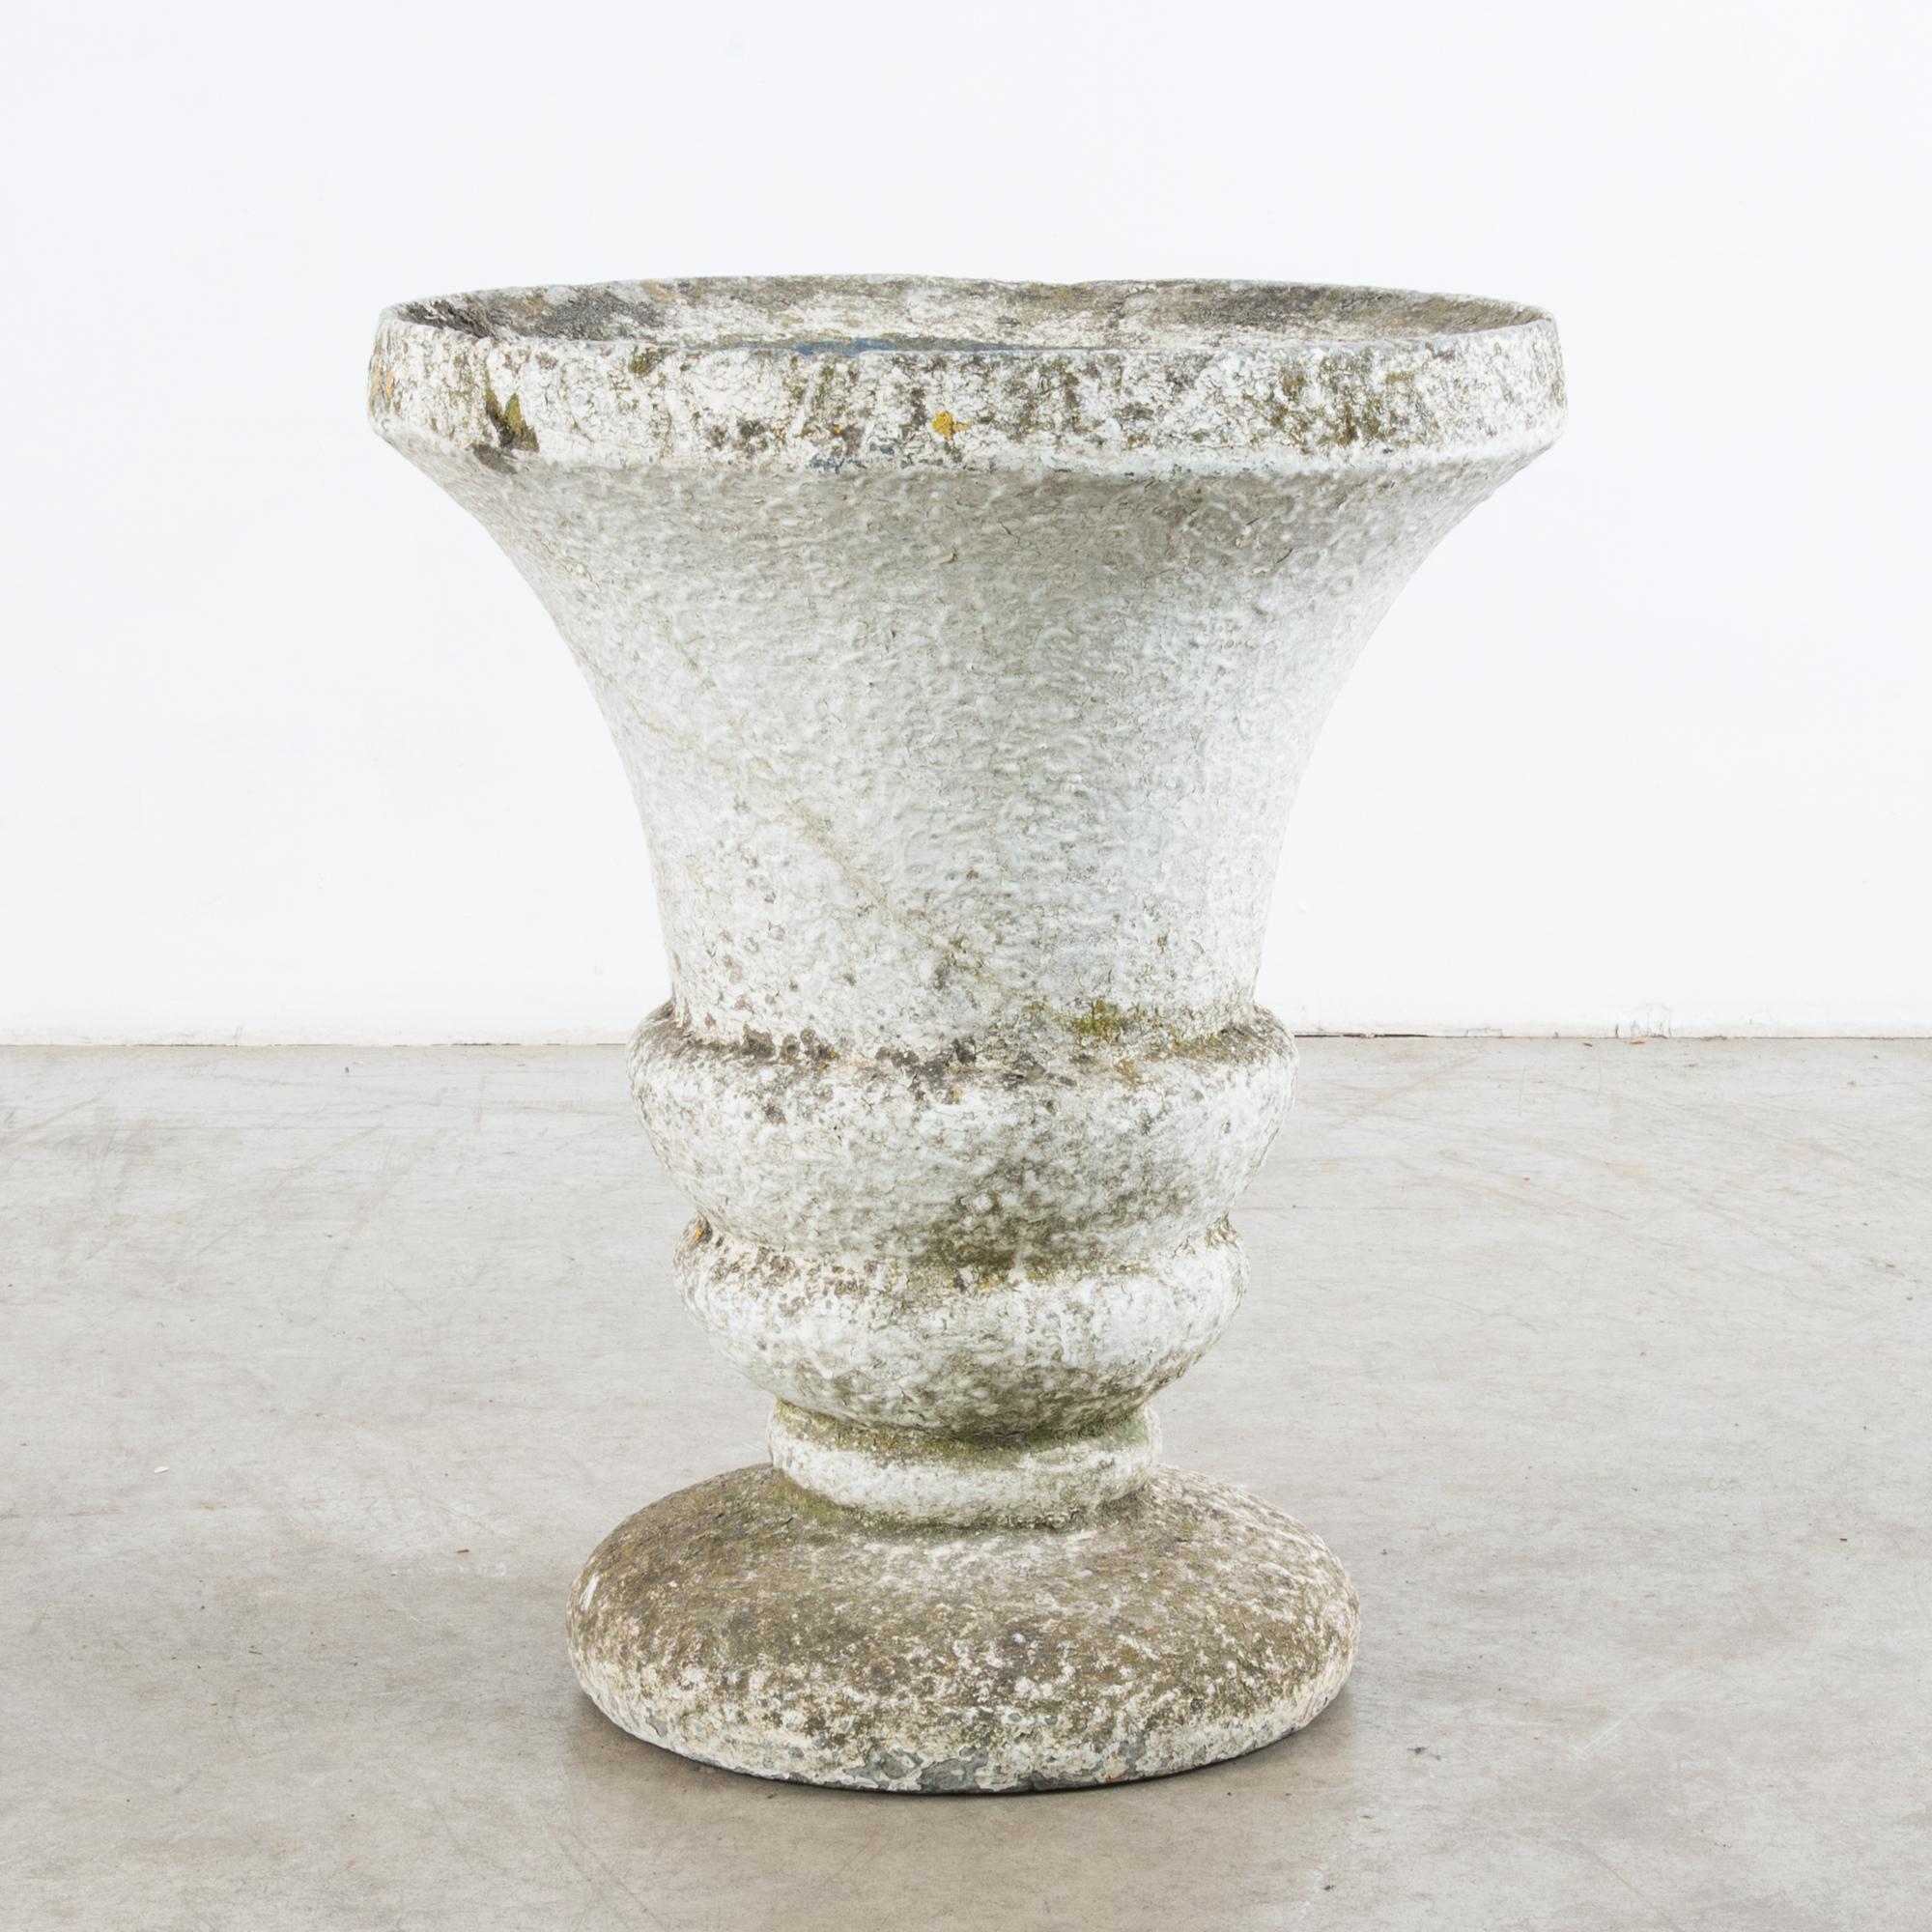 This bell-shaped concrete planter was made in France, circa 1960. With its rich, textured patina, the planter will inject an old-world charm into any interior space. The pair of ringed moldings above the circular base accentuates the curvilinear